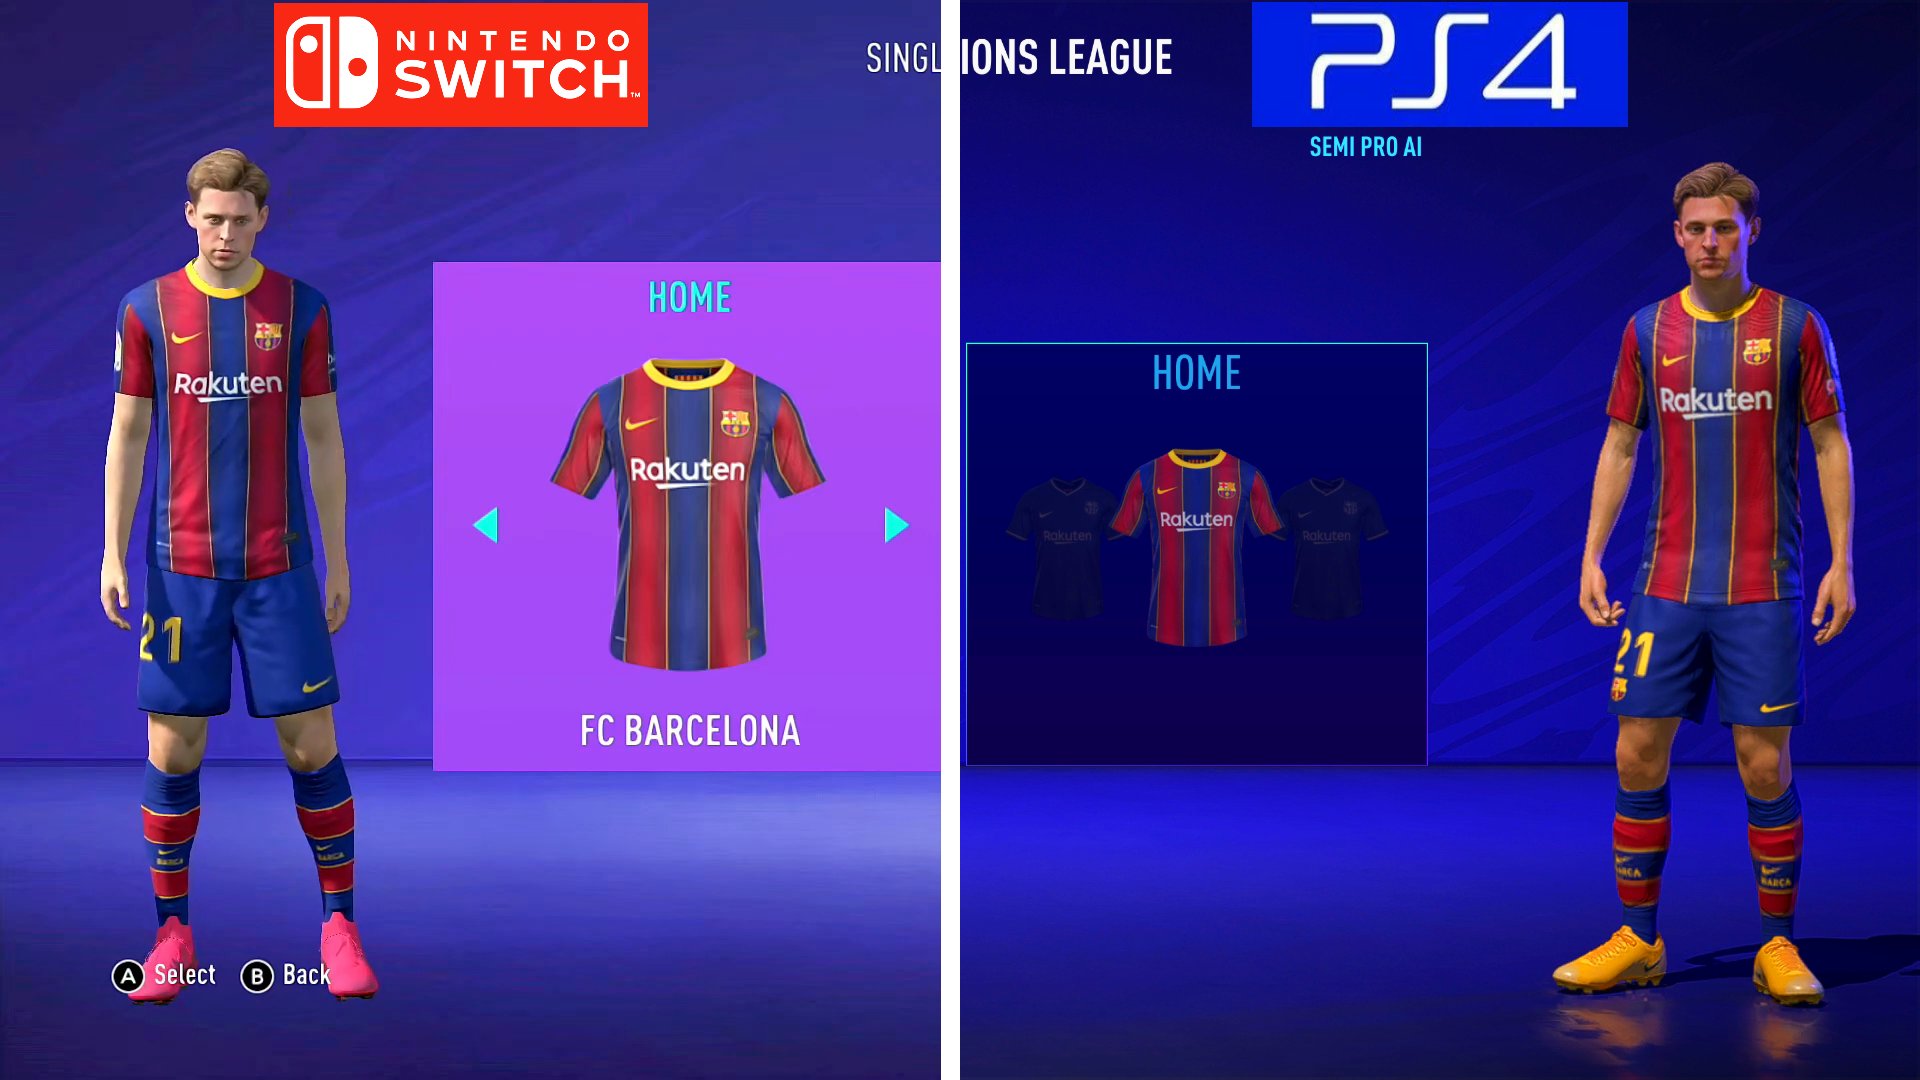 Anonymous Gamer on Twitter: "FIFA 21 | Nintendo Switch VS PS4 | Gameplay  Comparison Link: https://t.co/nBZCOhwXW5 : #FIFA21 #FIFA #Switch #PS4  https://t.co/mtxXz6F3rA" / Twitter